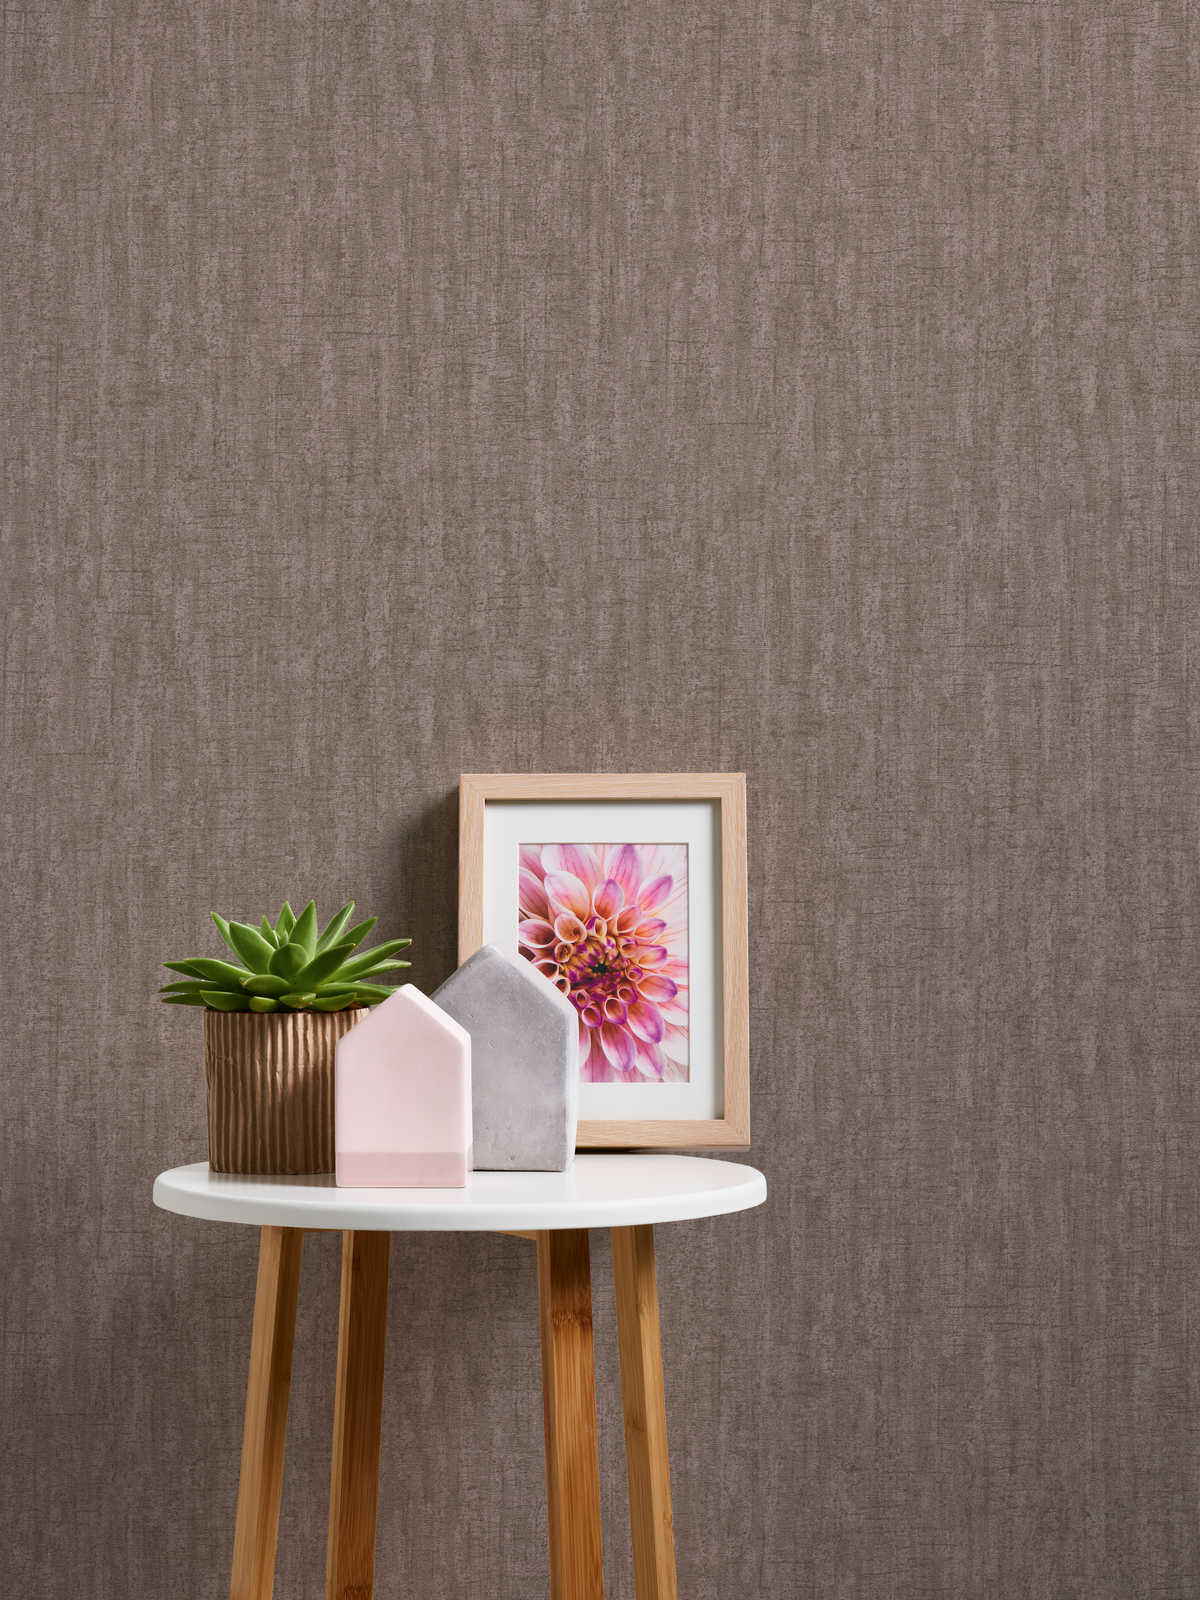             Plain non-woven wallpaper glossy with textured pattern - brown
        